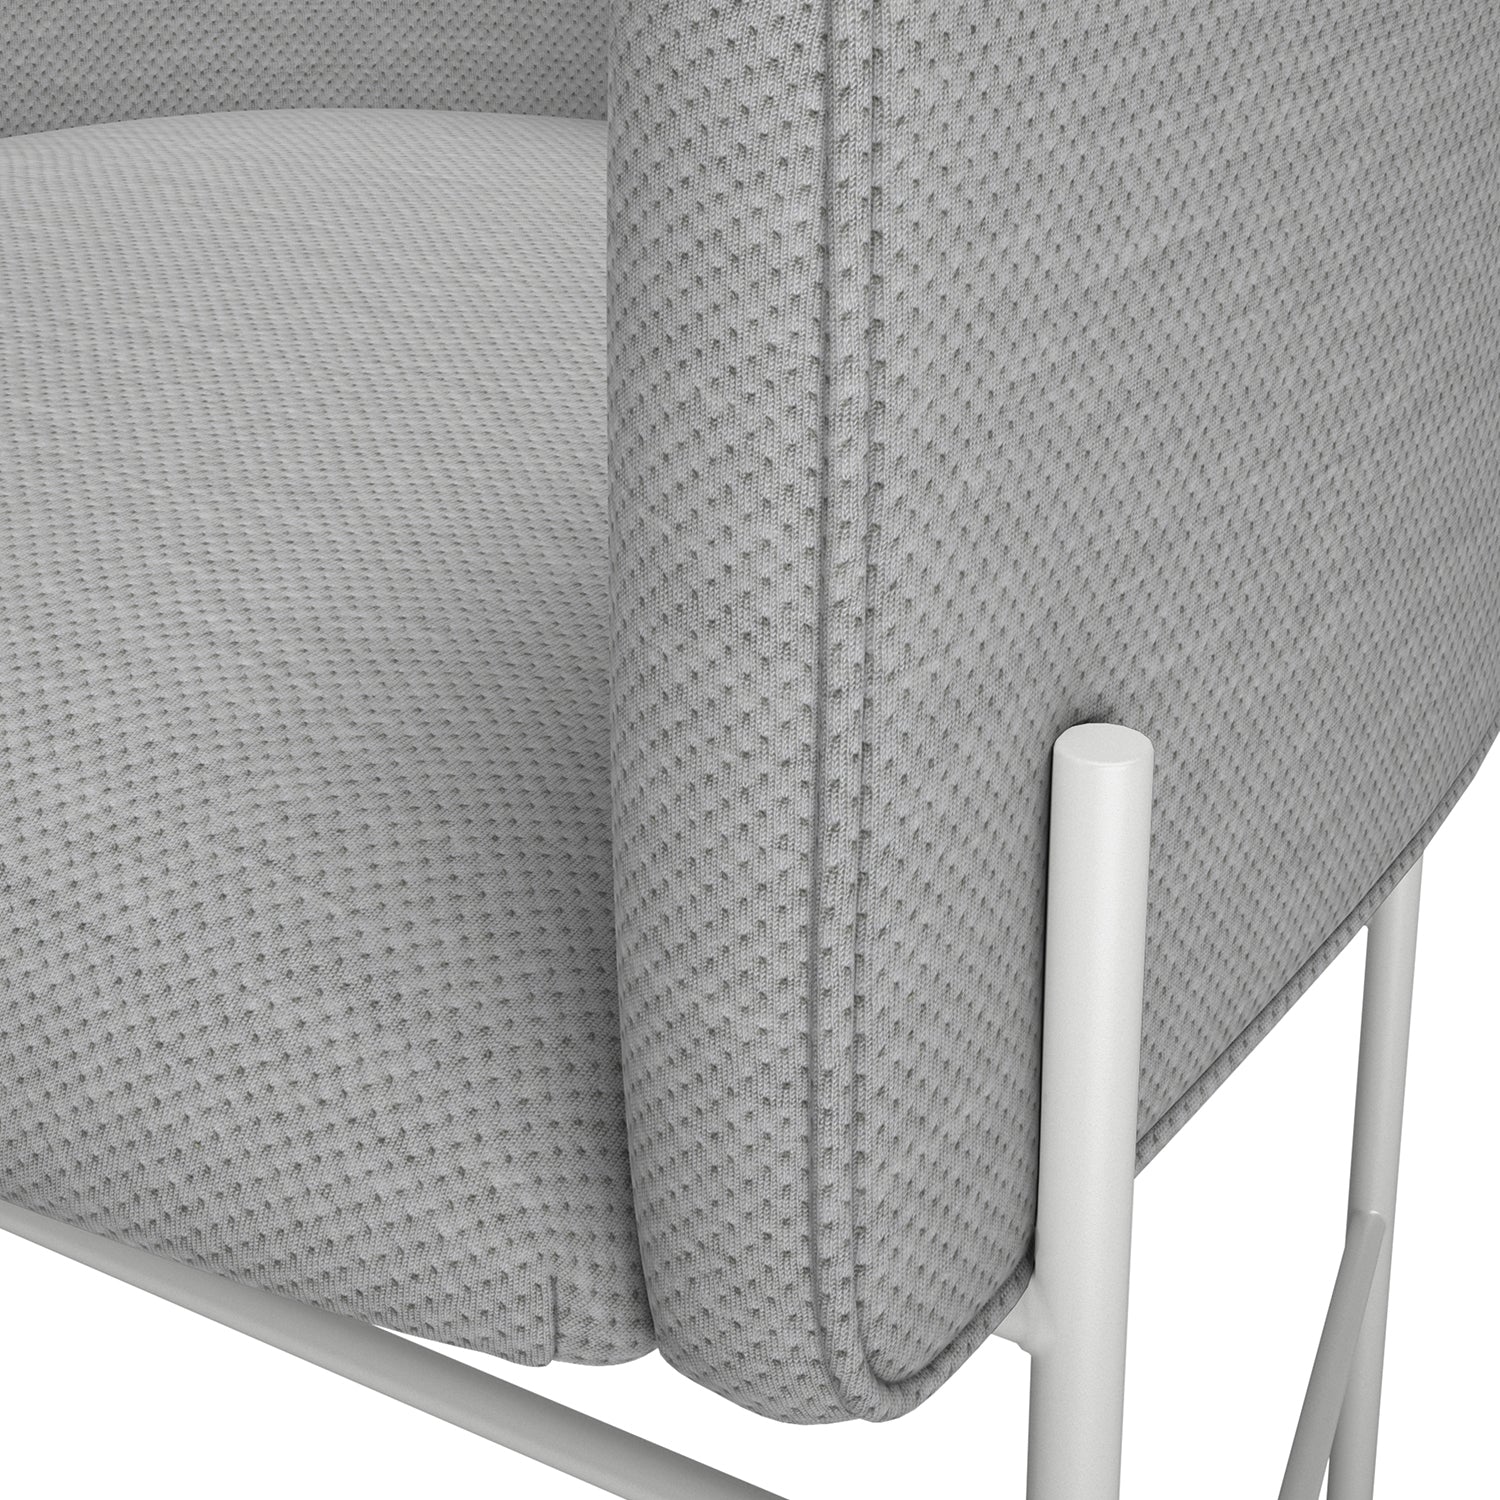 Covent Chair - The Design Choice